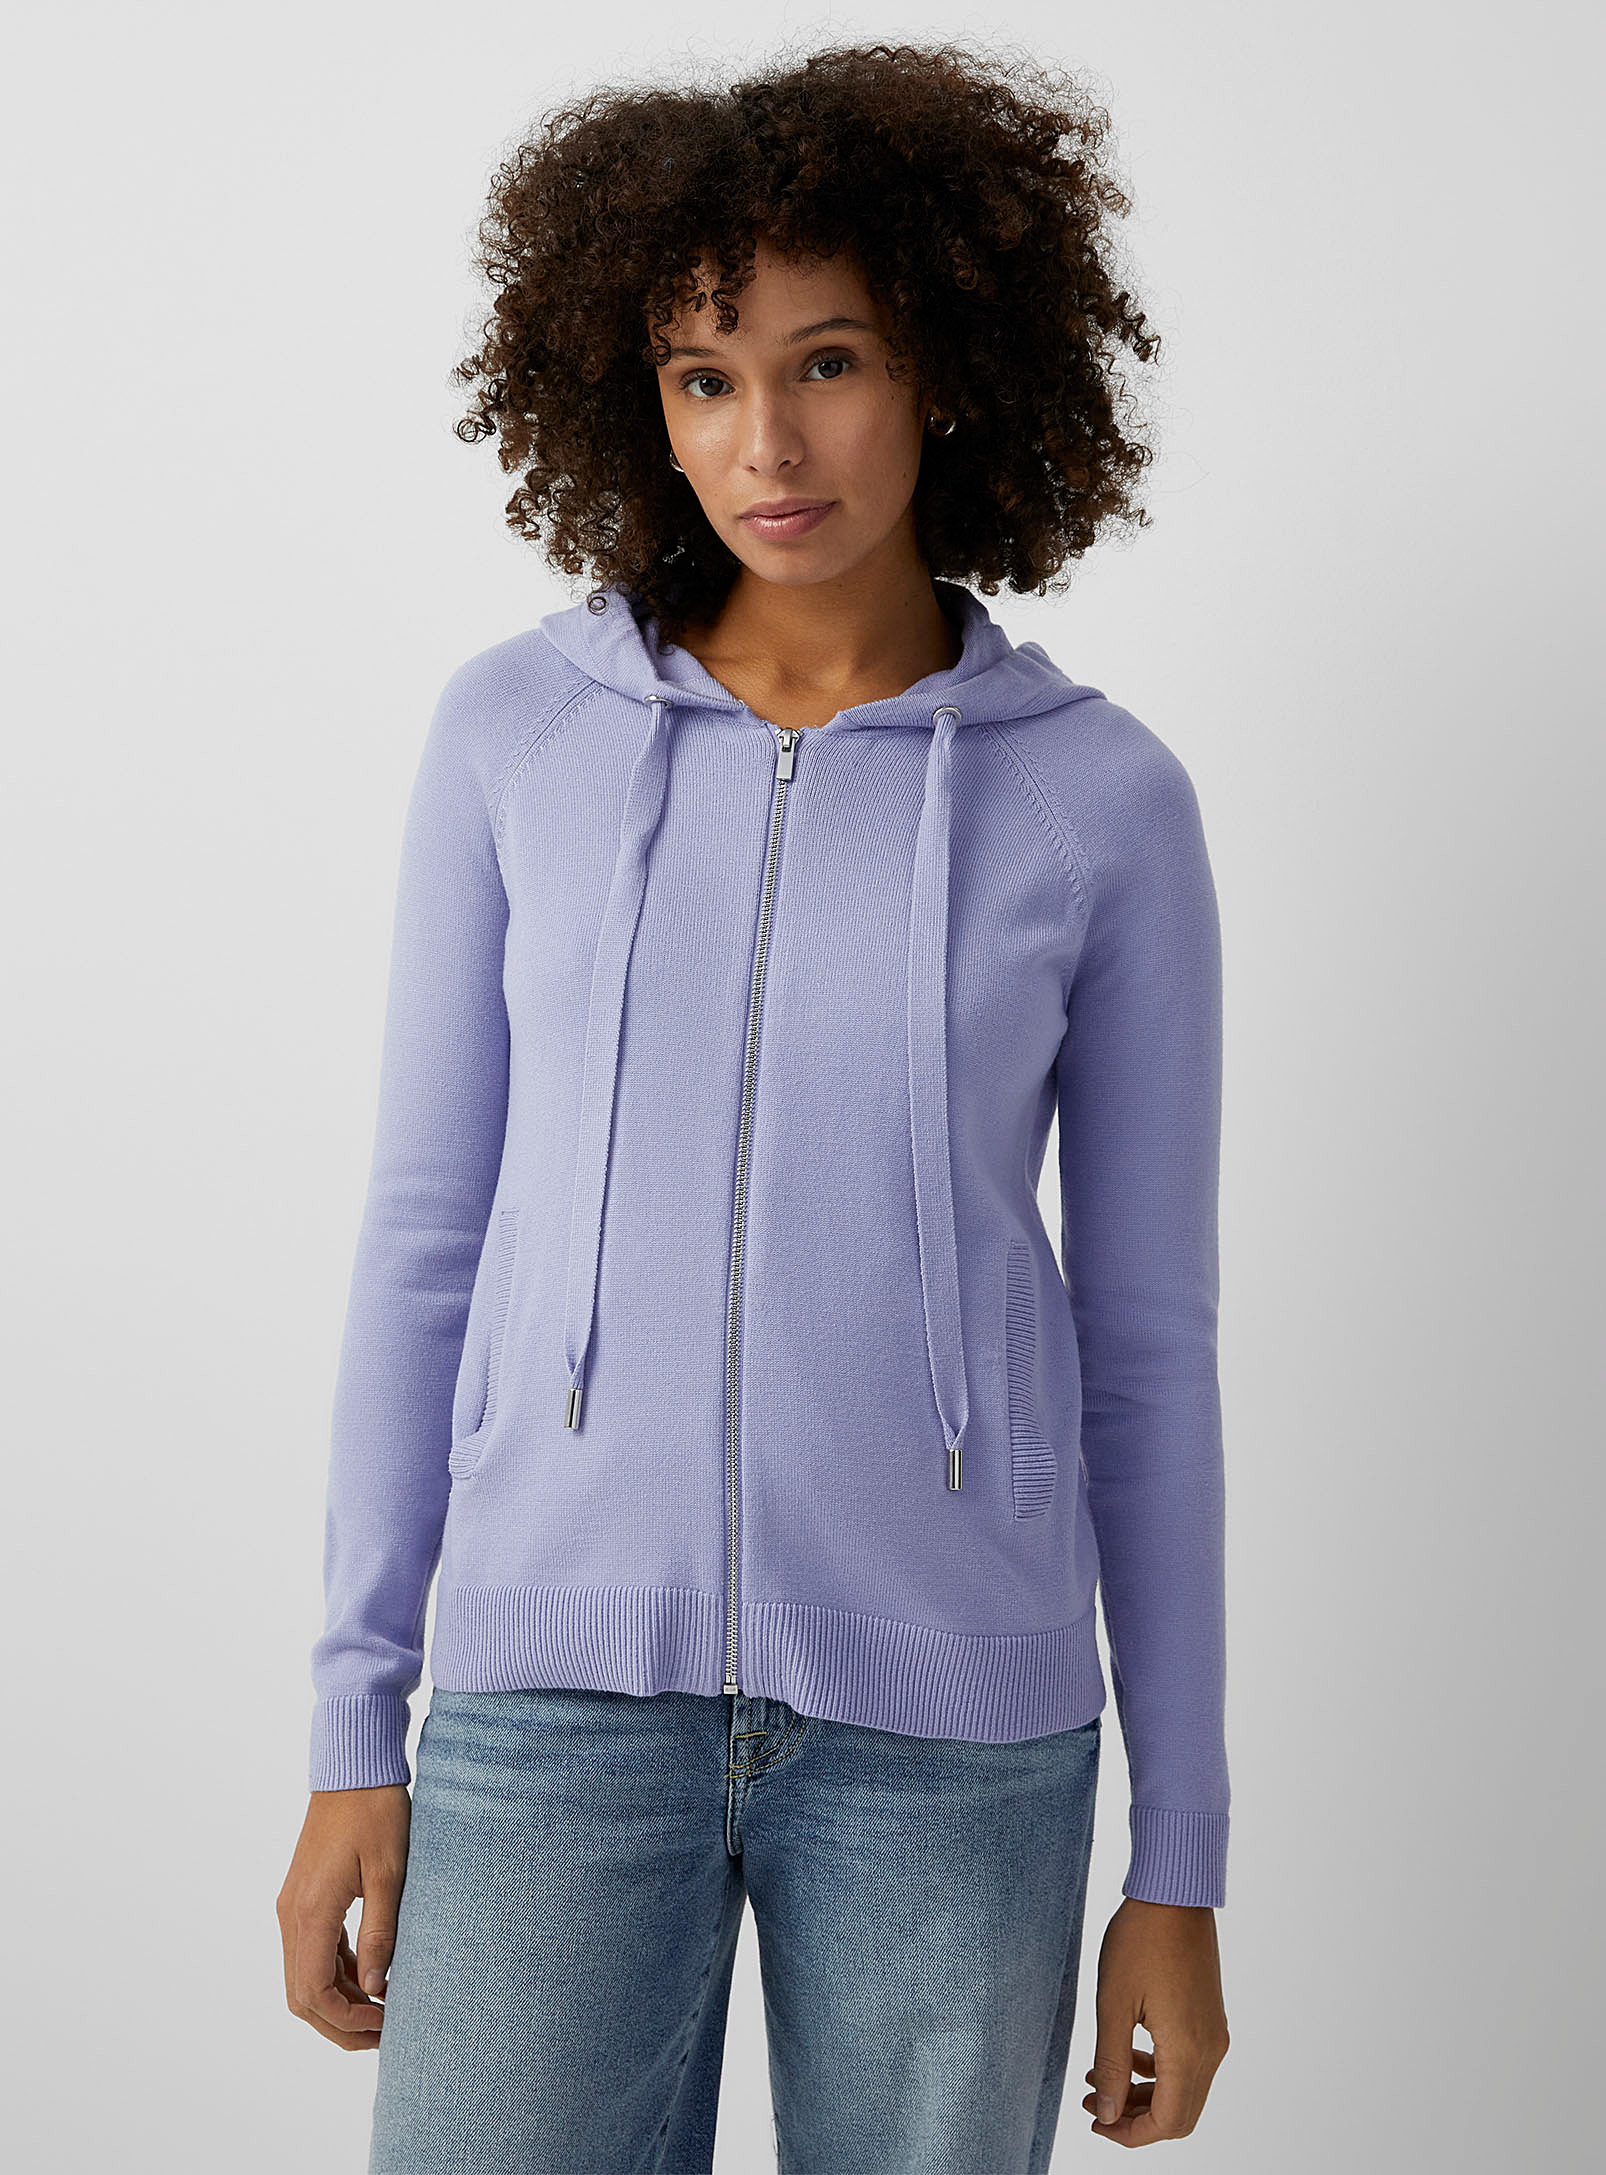 Contemporaine - Women's Hooded knit zip-up Cardigan Sweater